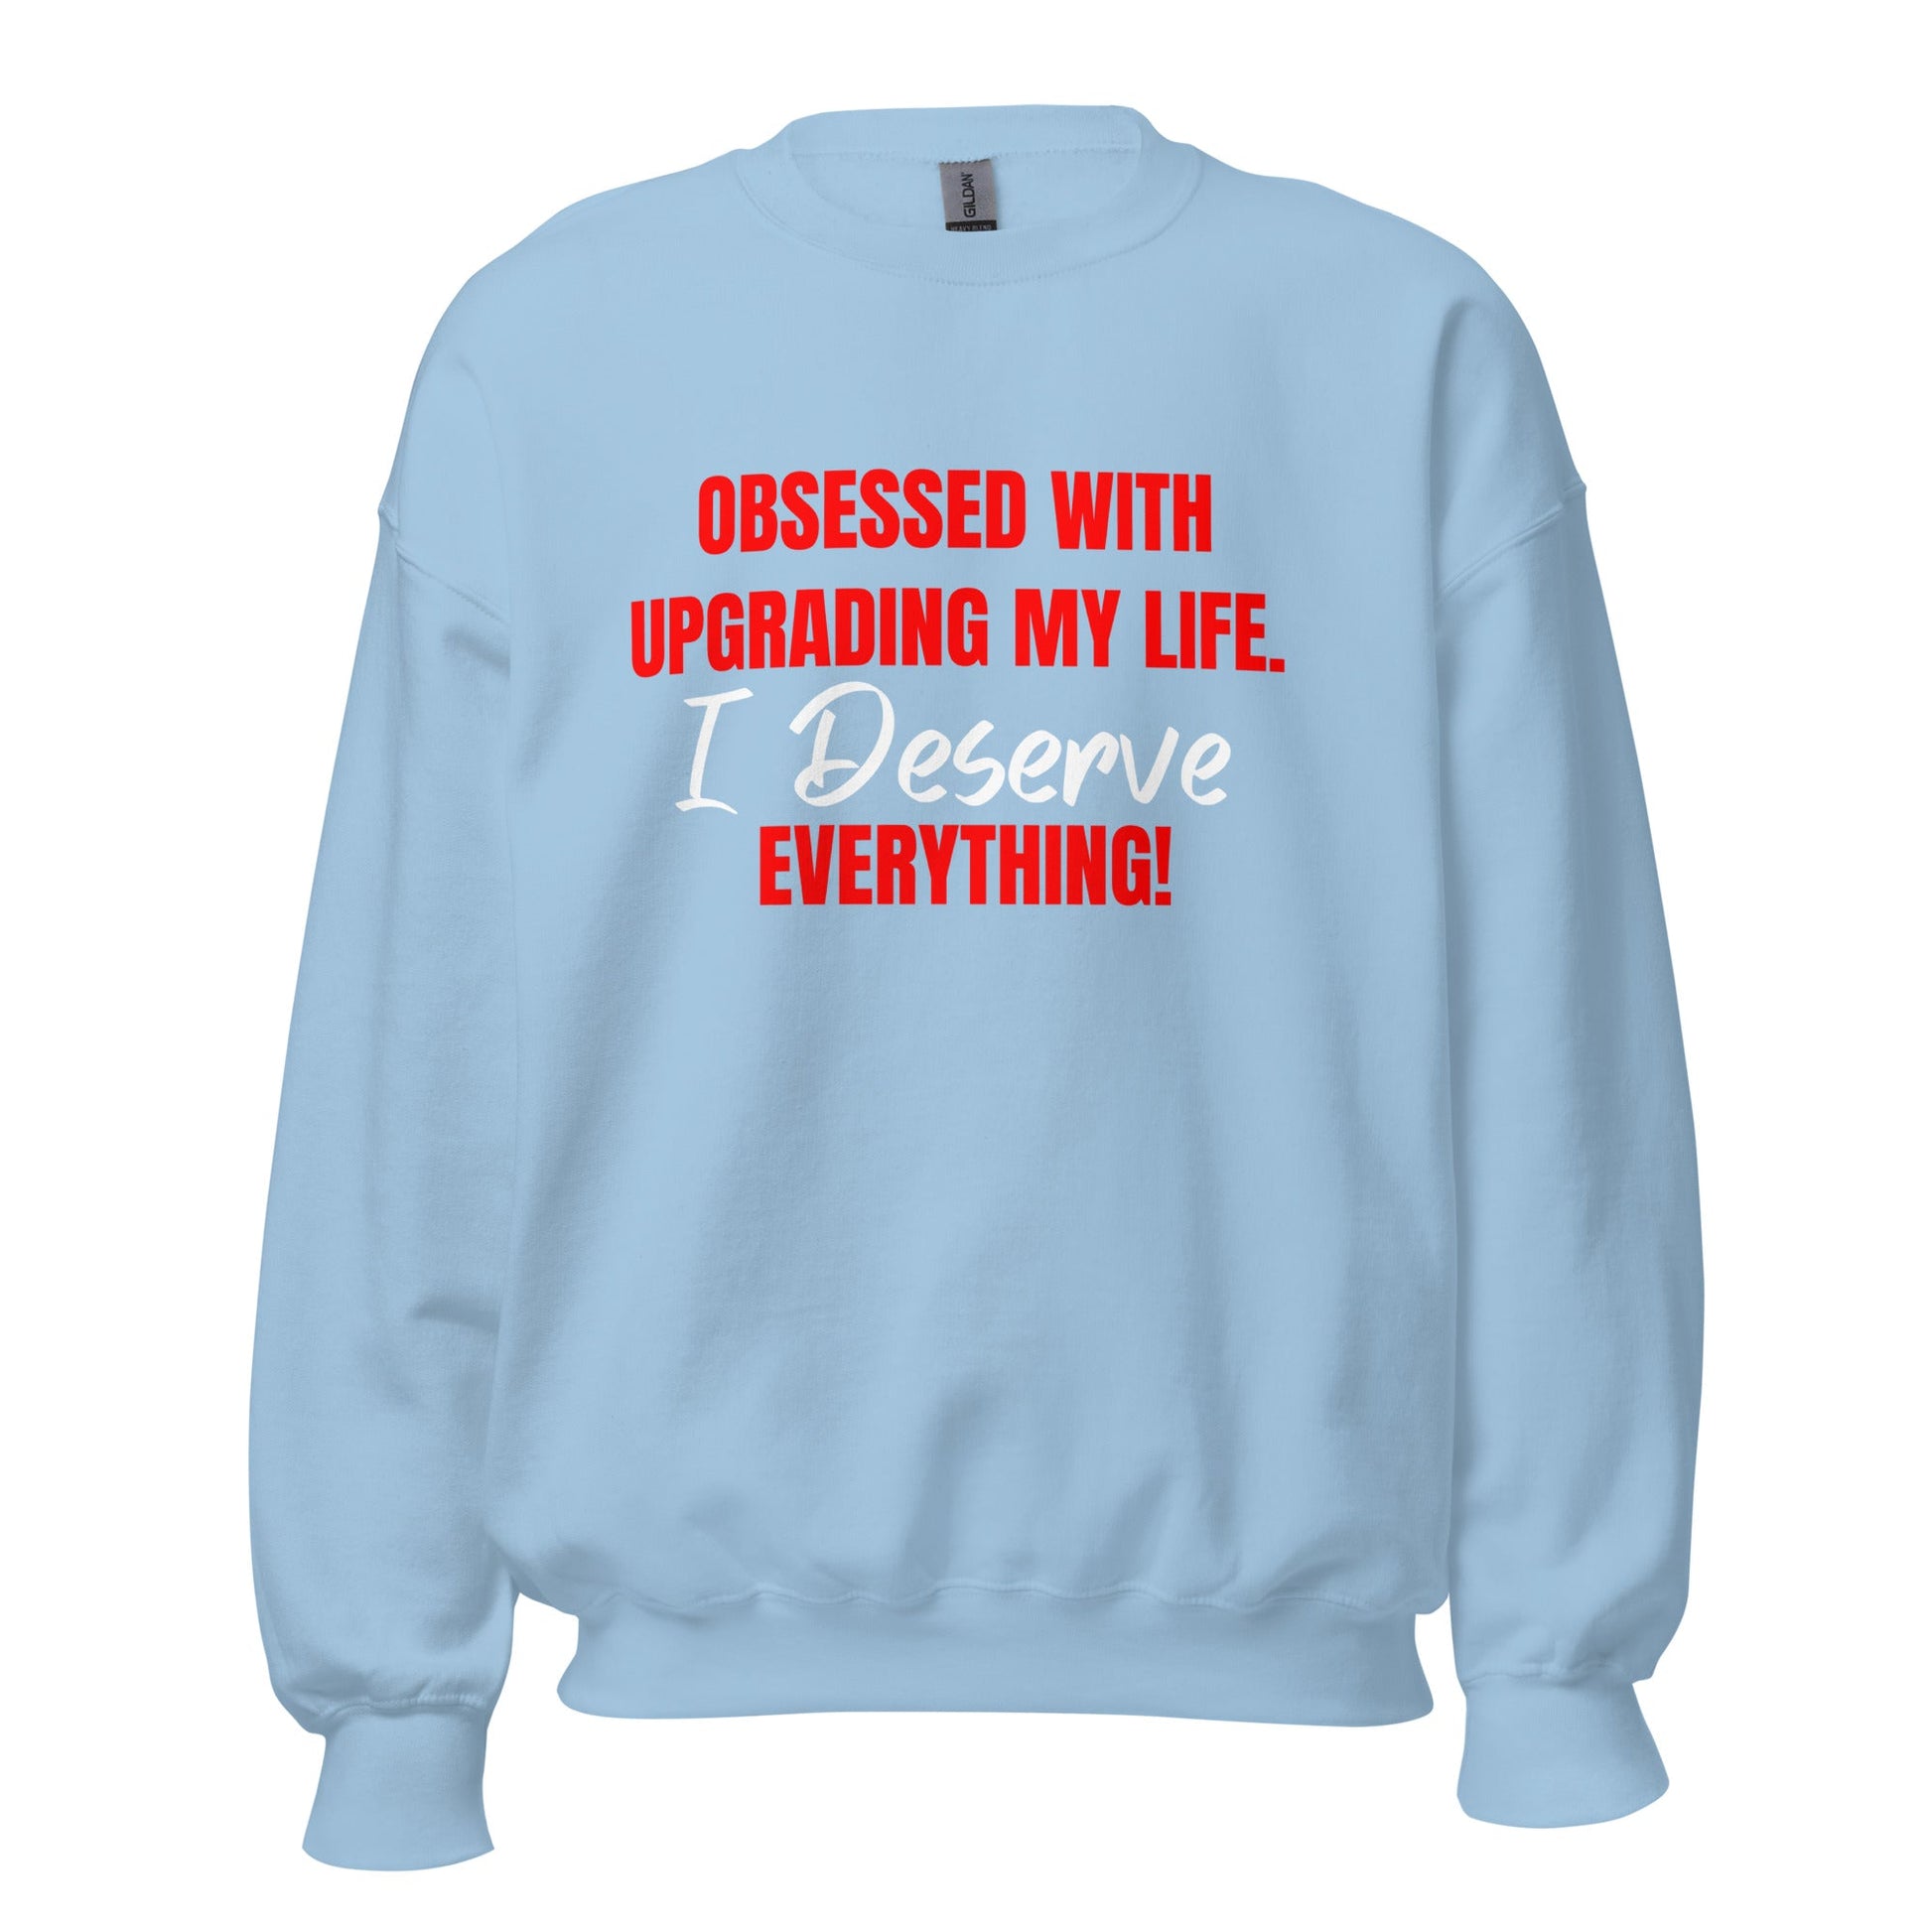 Obsessed With Upgrading My Life I Deserve Everything! Unisex Sweatshirt - Catch This Tea Shirts